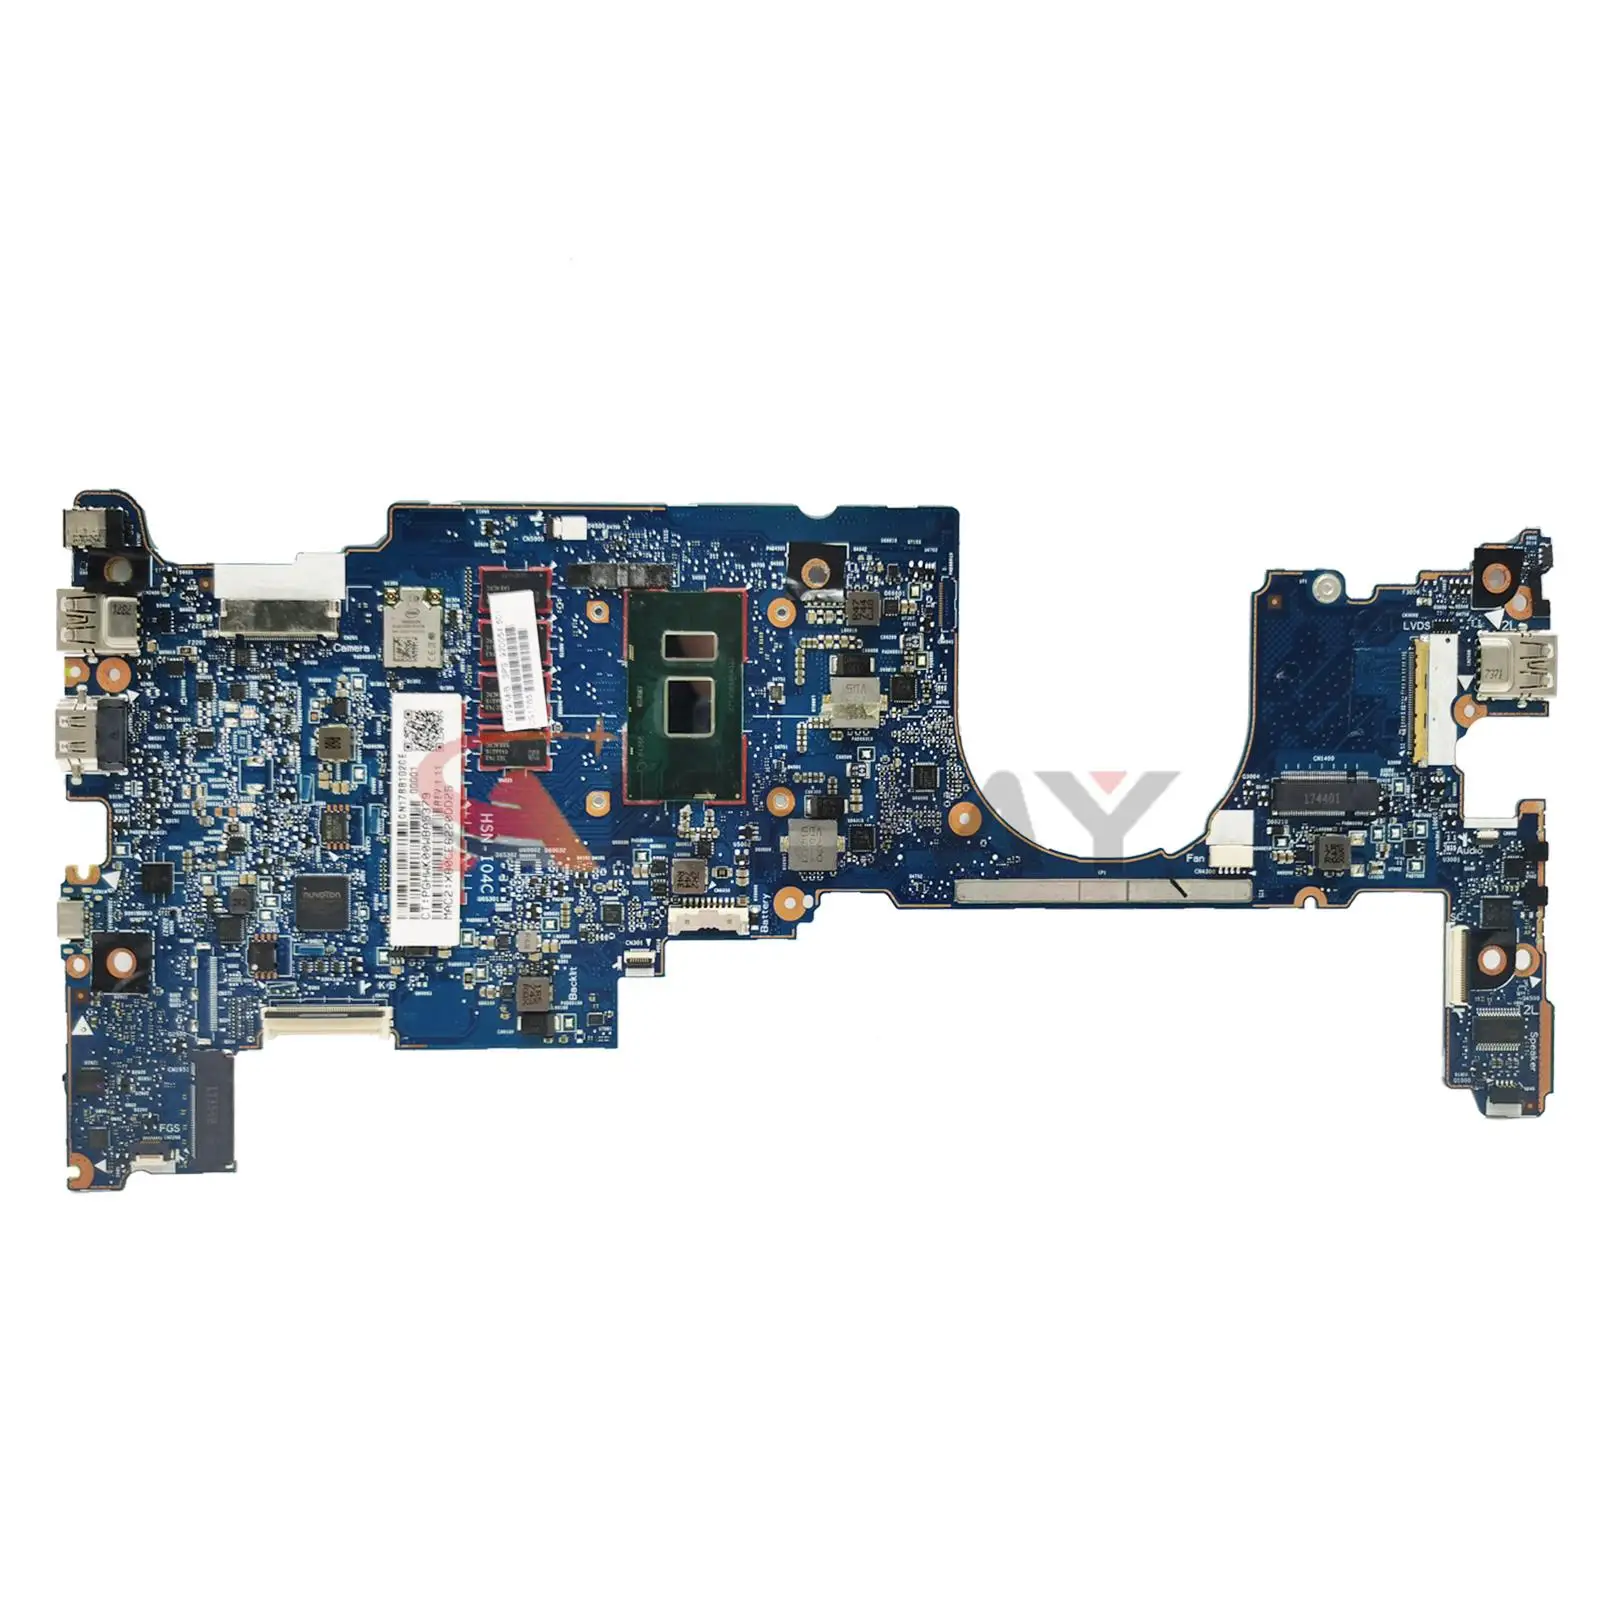 

6050A2848001 Motherboard For HP EliteBook x360 1030 G2 Laptop Motherboard Mainboard with I5 I7 7th Gen CPU 8GB 16GB RAM